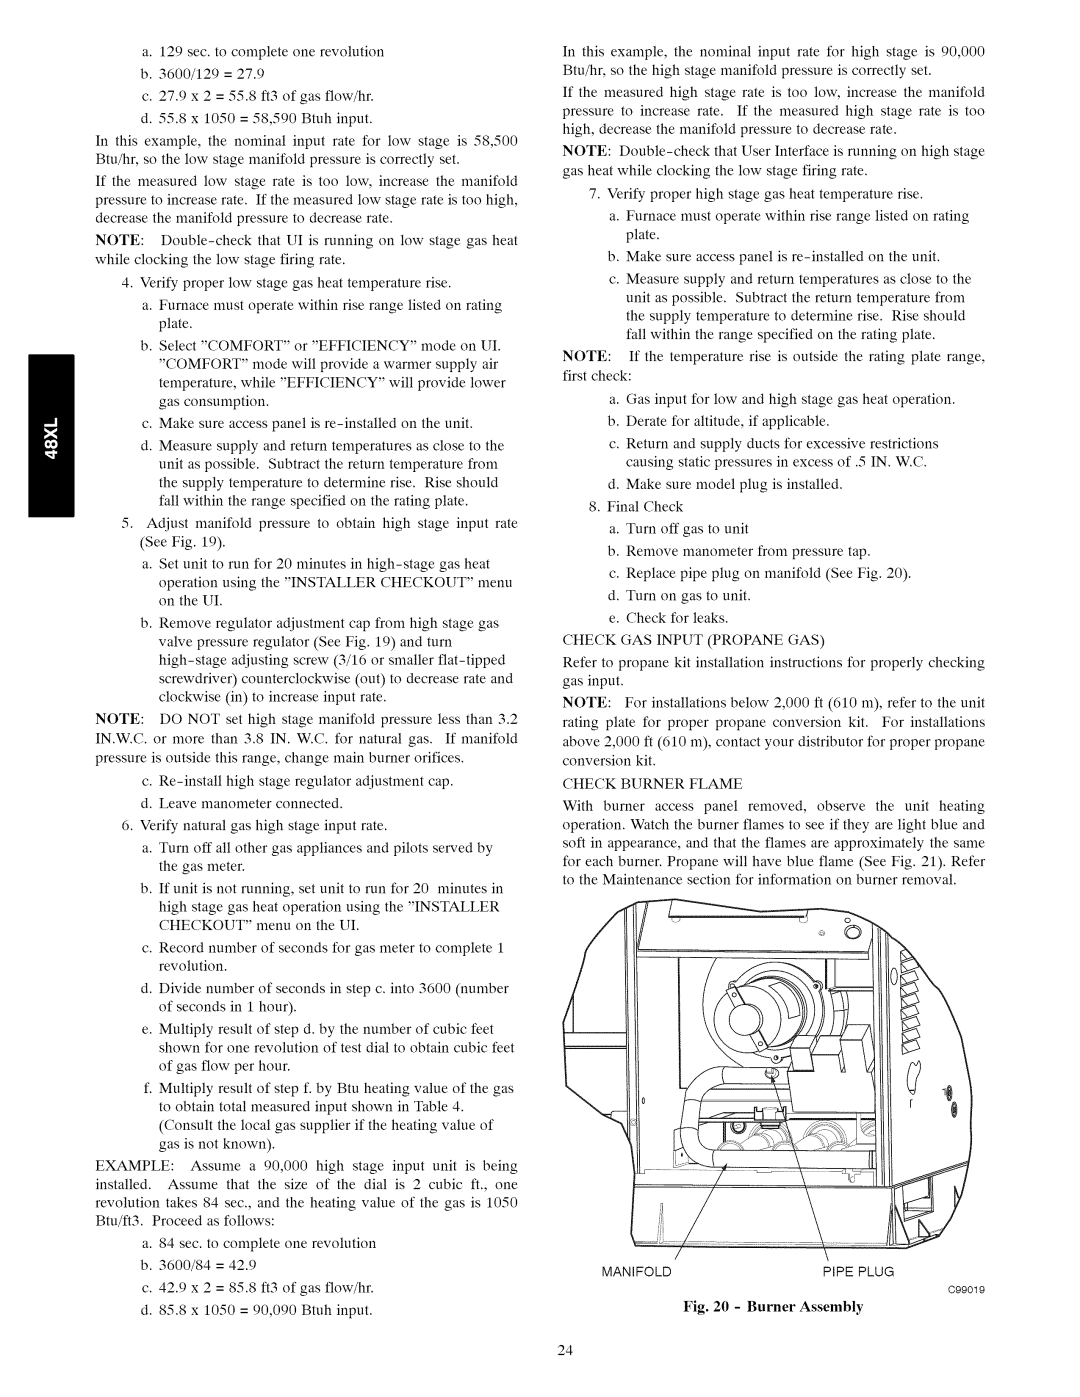 Carrier 48XL installation instructions d. Make sure model plug is installed 